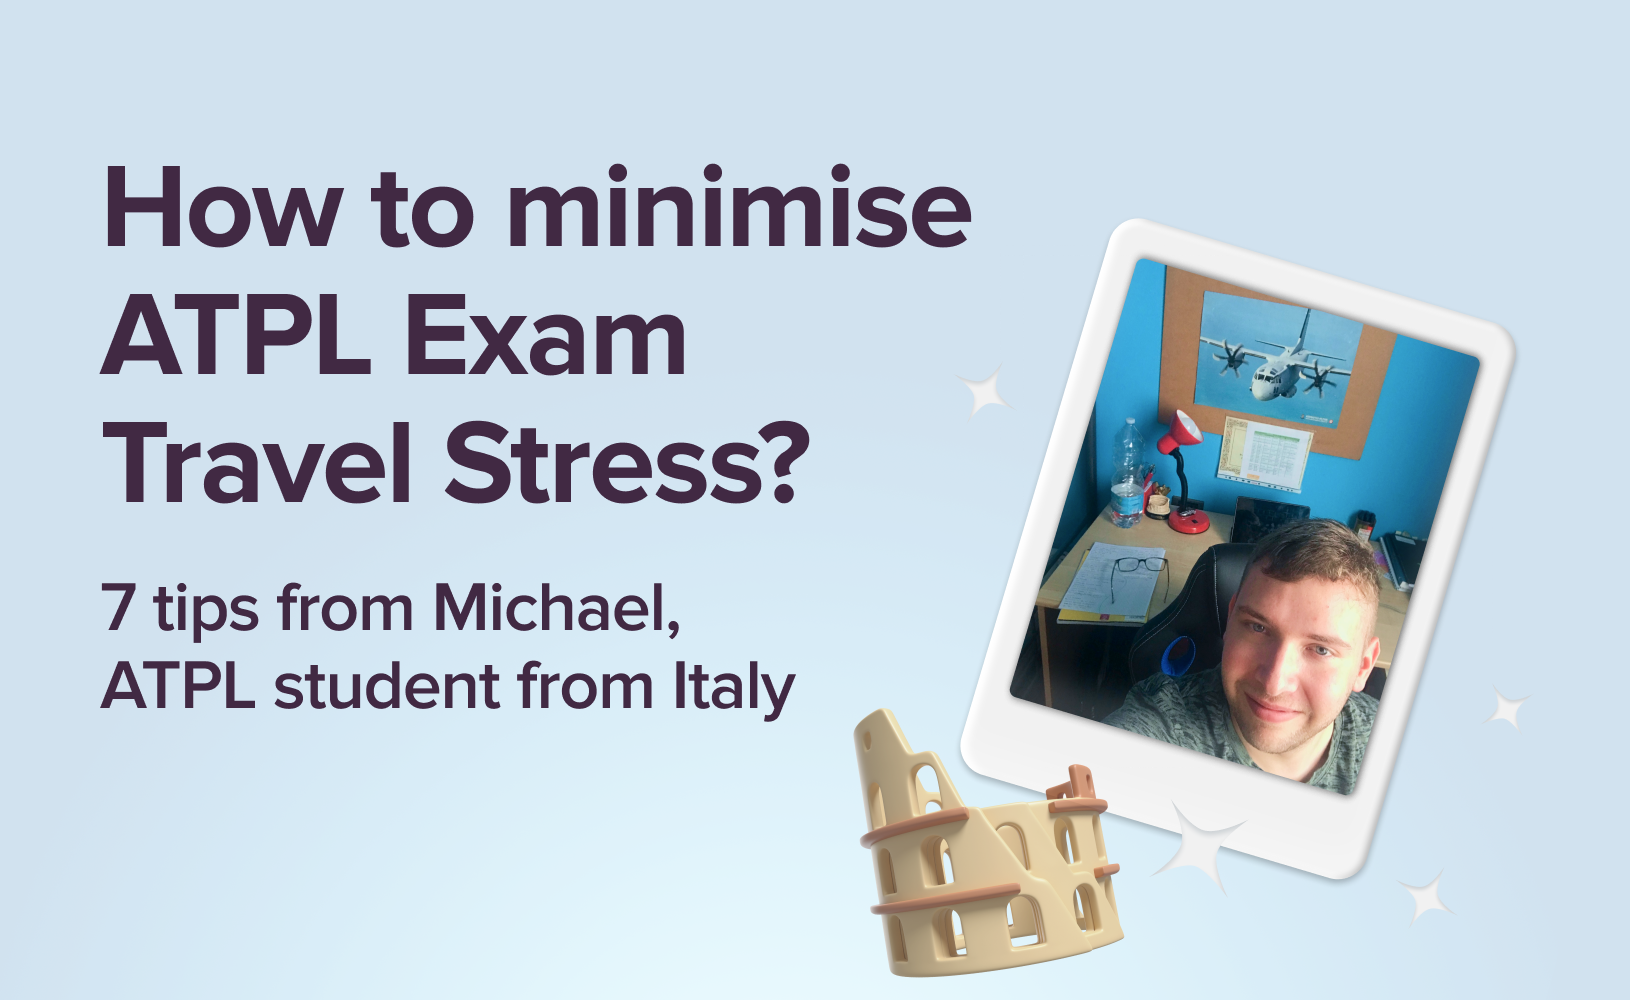 7 Stress Management Tips for Exam Travel from Michael, ATPL student from Italy